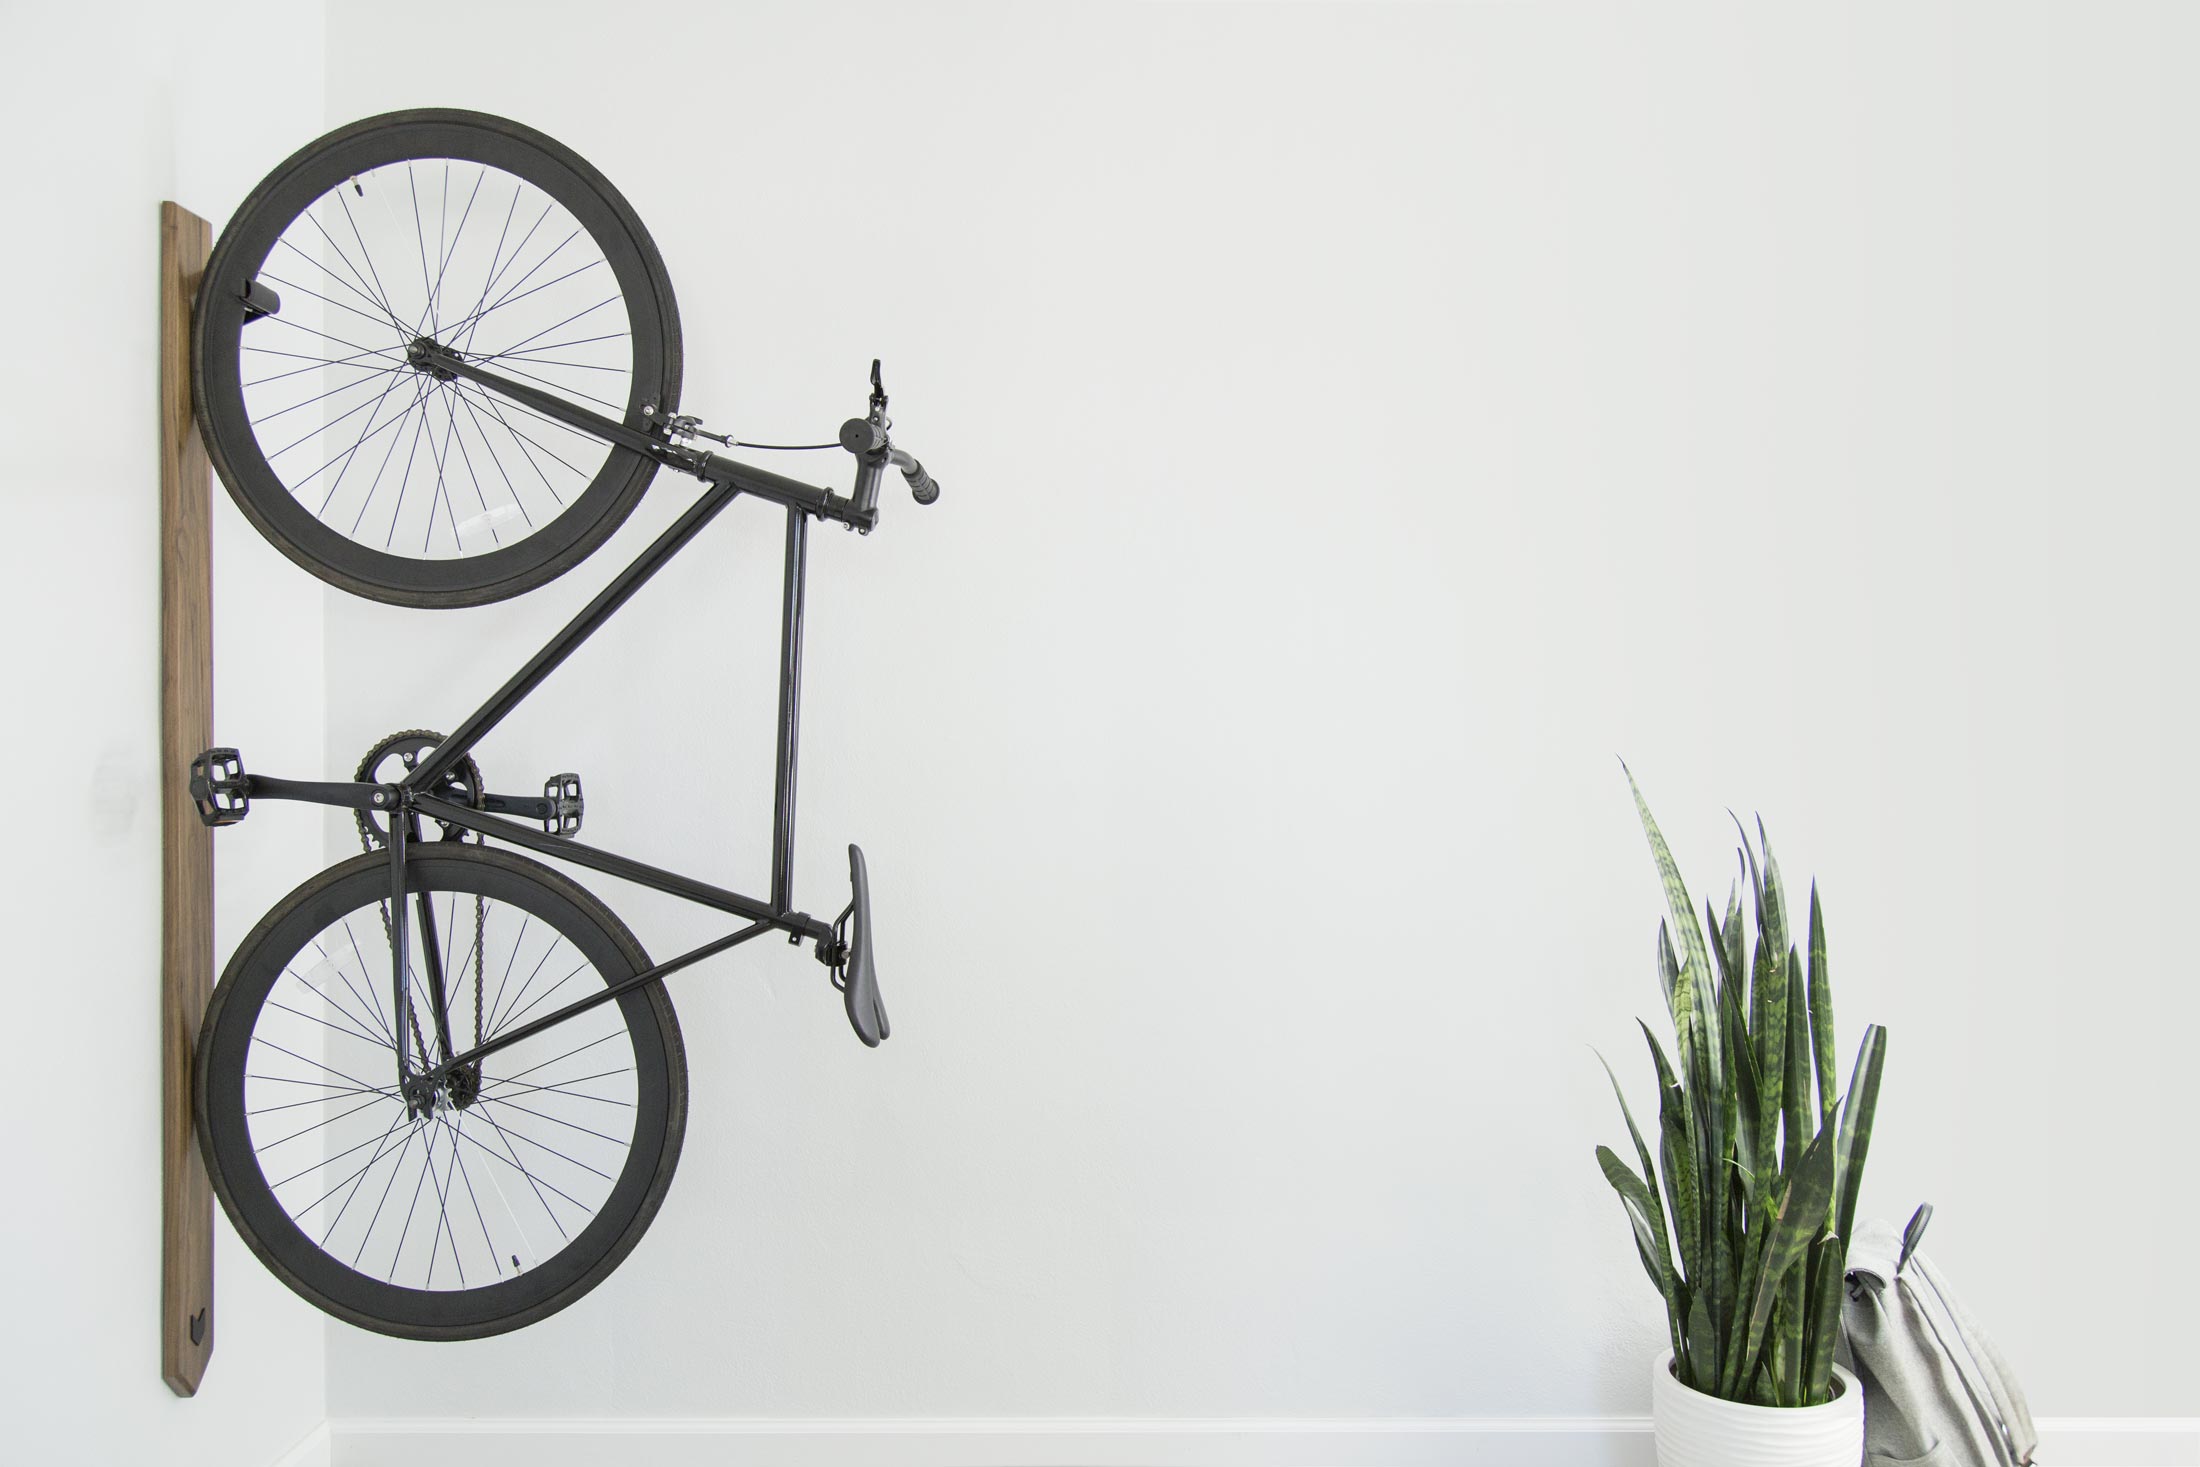 An Artifox Black Walnut Rack is mounted to a white wall in a tiny apartment and storing a black bike vertically.